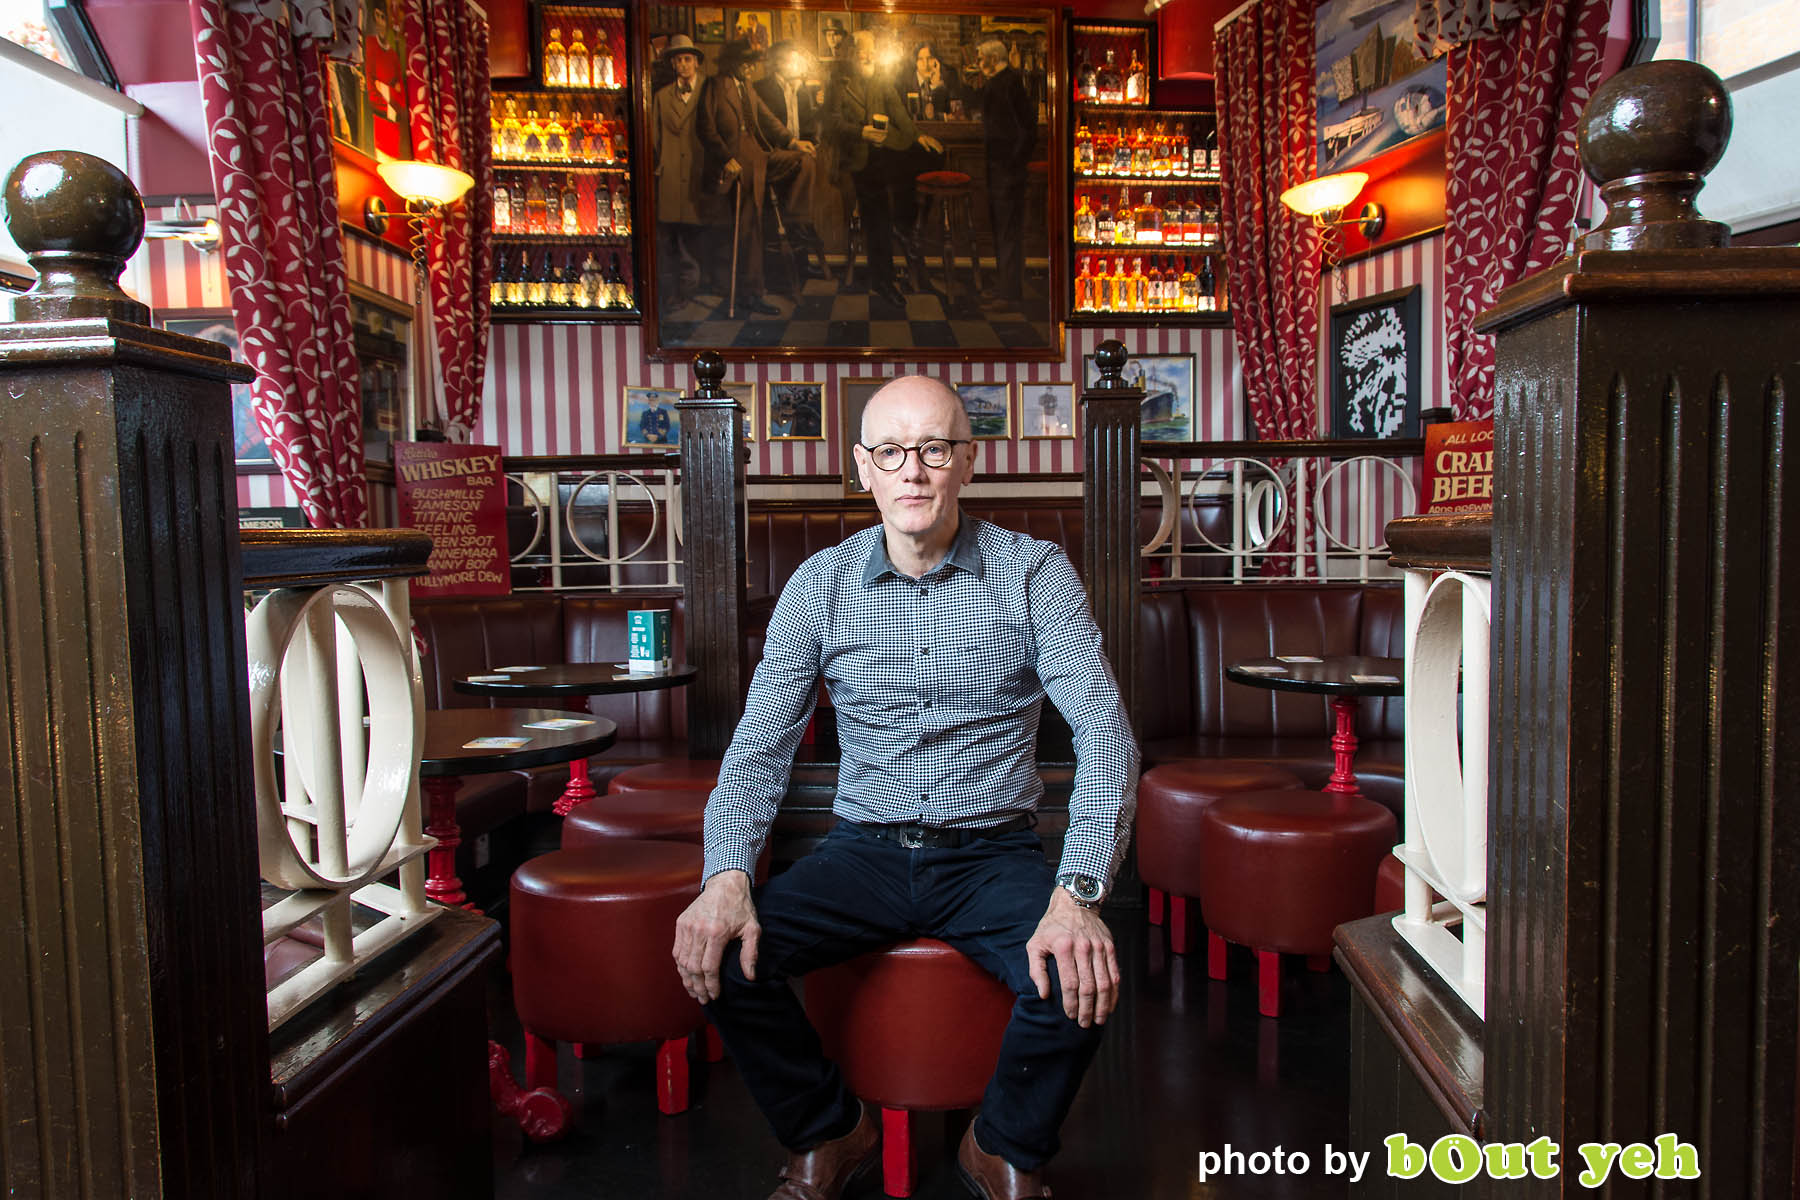 John Bittles, Bittles Bar, by Bout Yeh photographers Belfast - photo 5008. Editorial feature about John Bittles, owner of Bittles Bar, Belfast, Northern Ireland